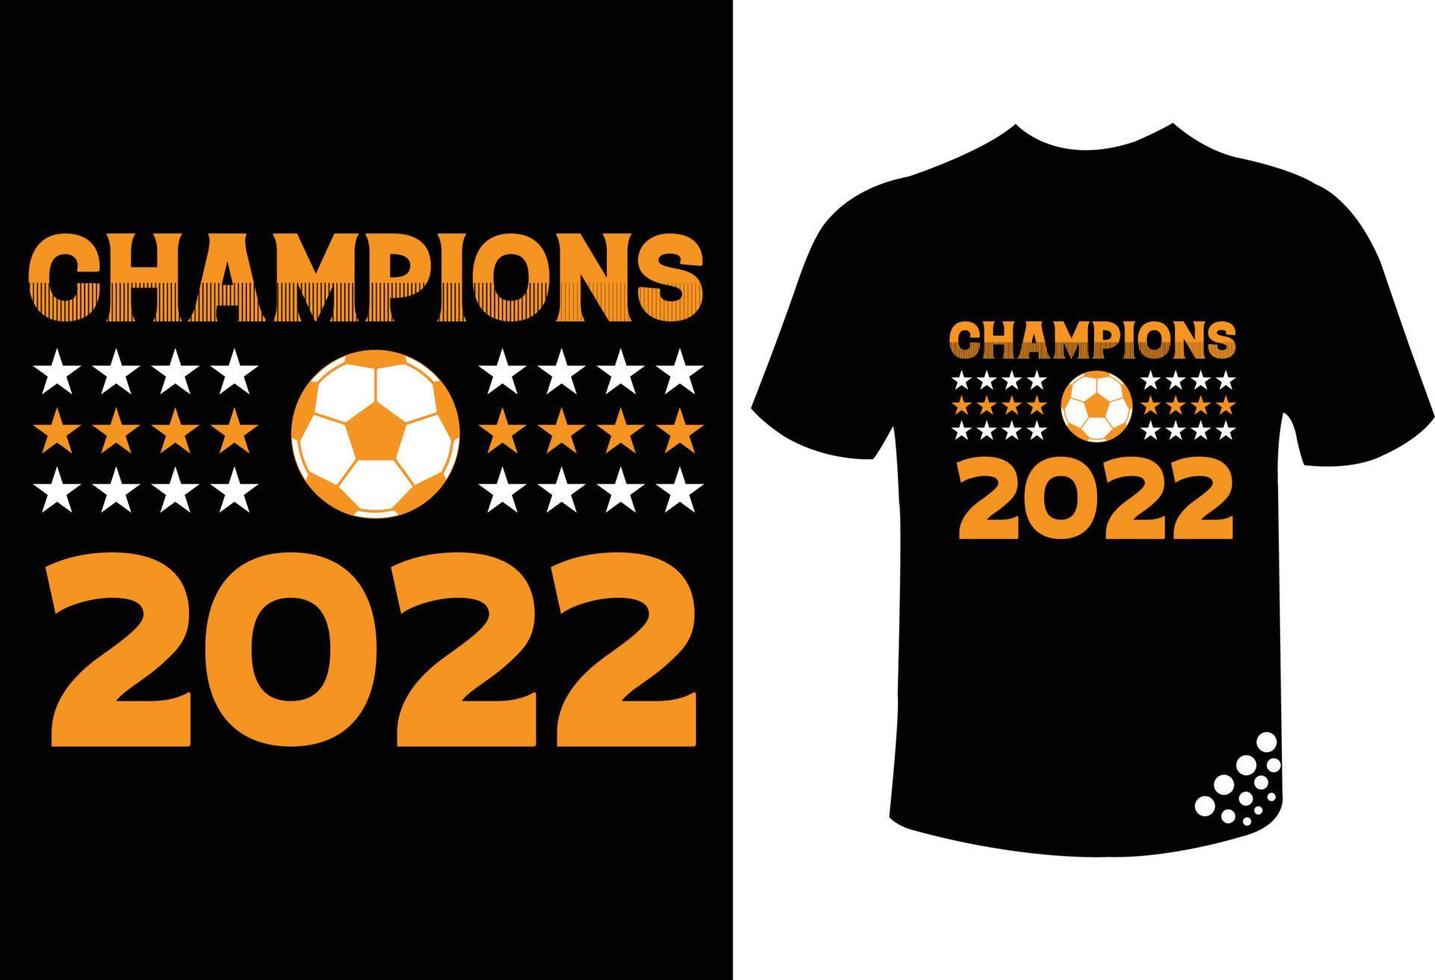 Champions 2022 best football t-shirt quote design for a soccer player vector